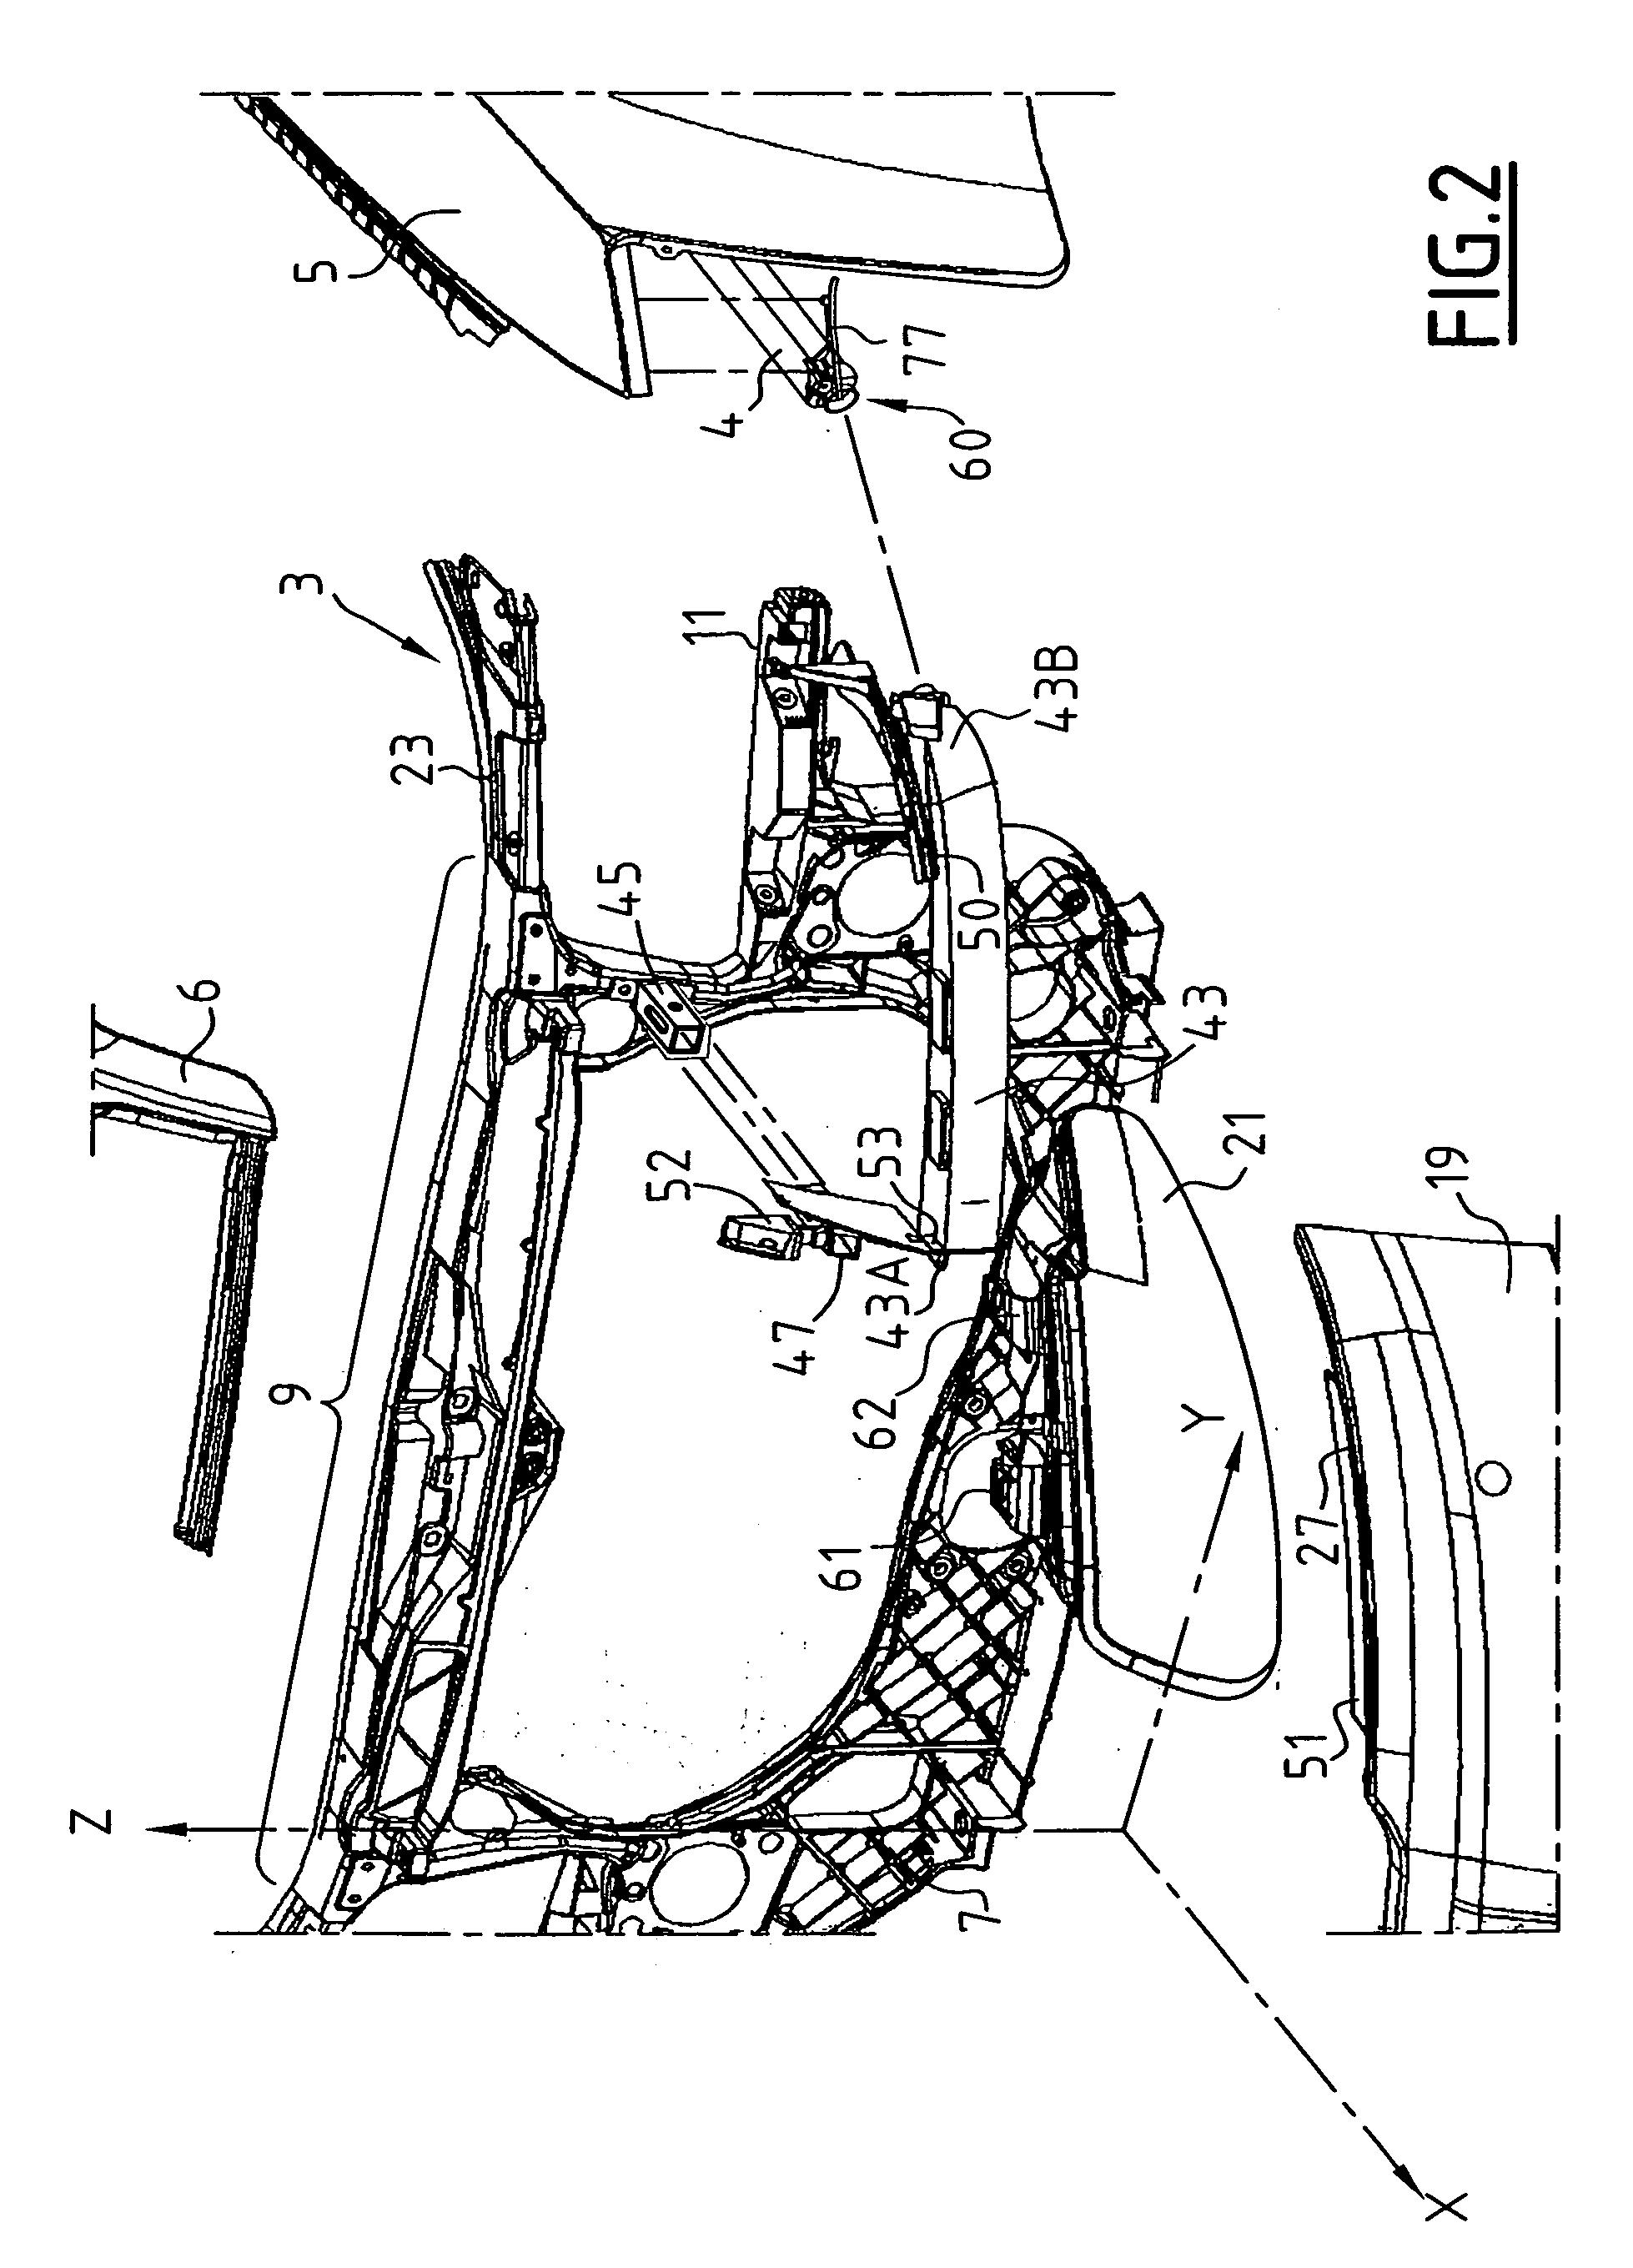 Motor vehicle front portion assembly provided with improved fastening and position-adjustment means, and a motor vehicle including such an assembly